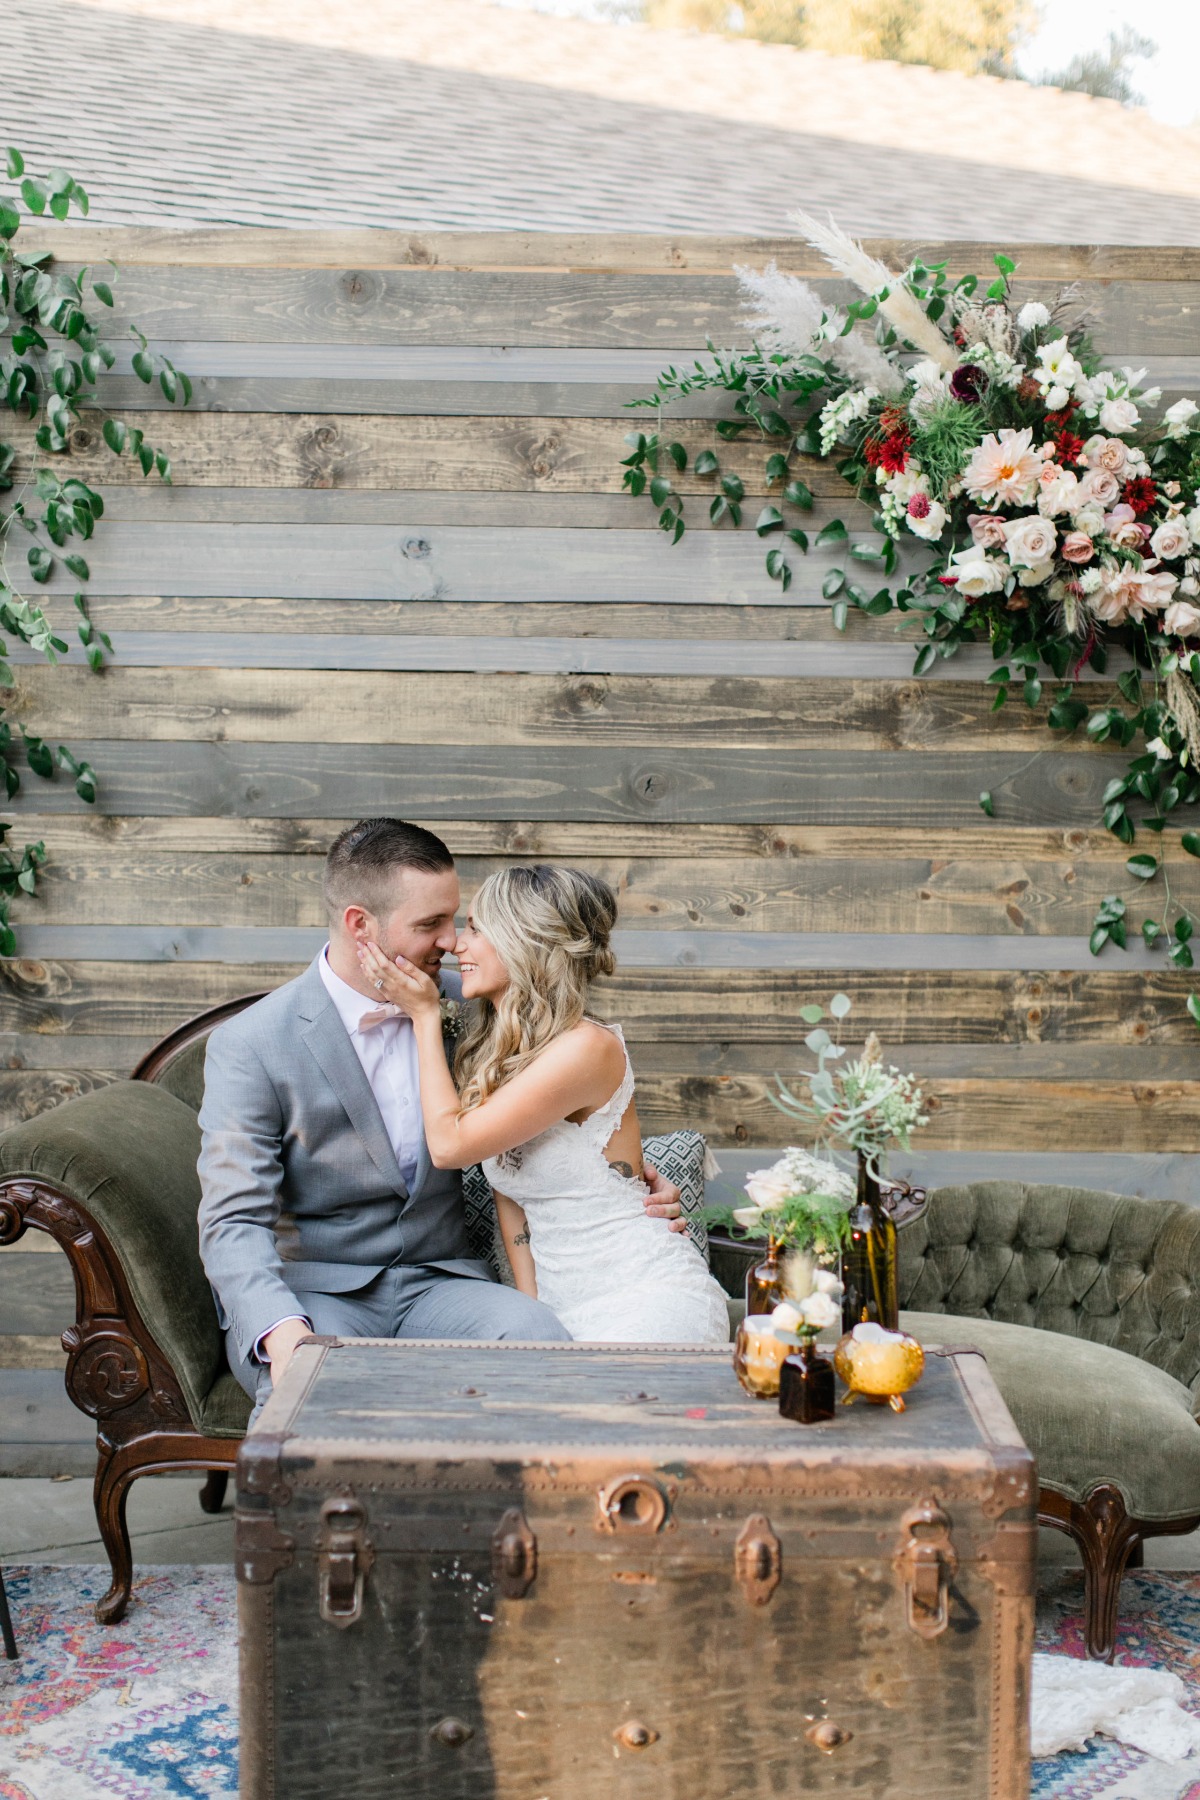 Rustic wedding lounge and photo booth